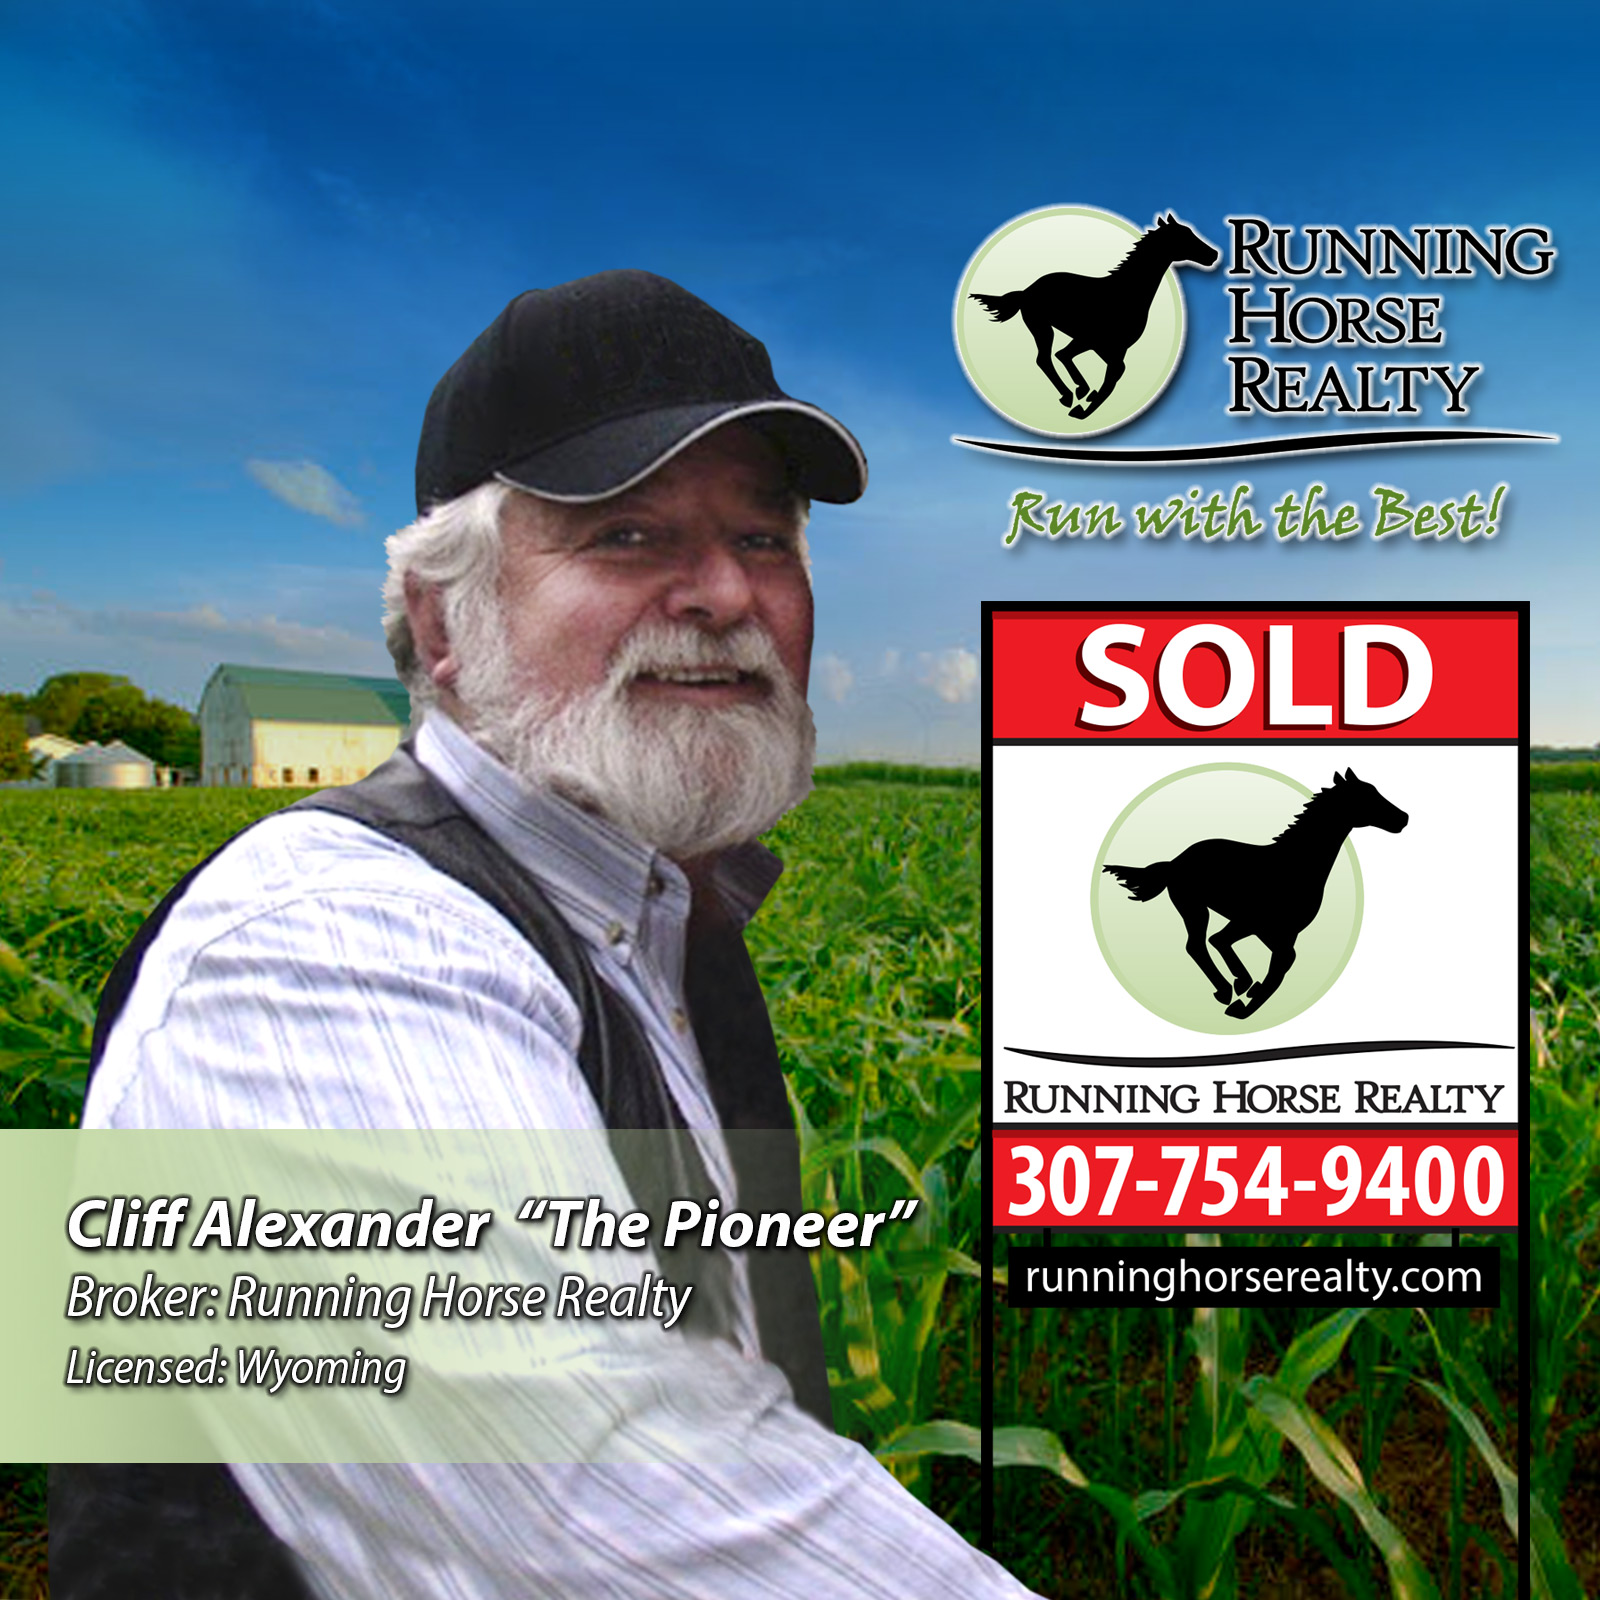 About Cliff Alexander at Running Horse Realty